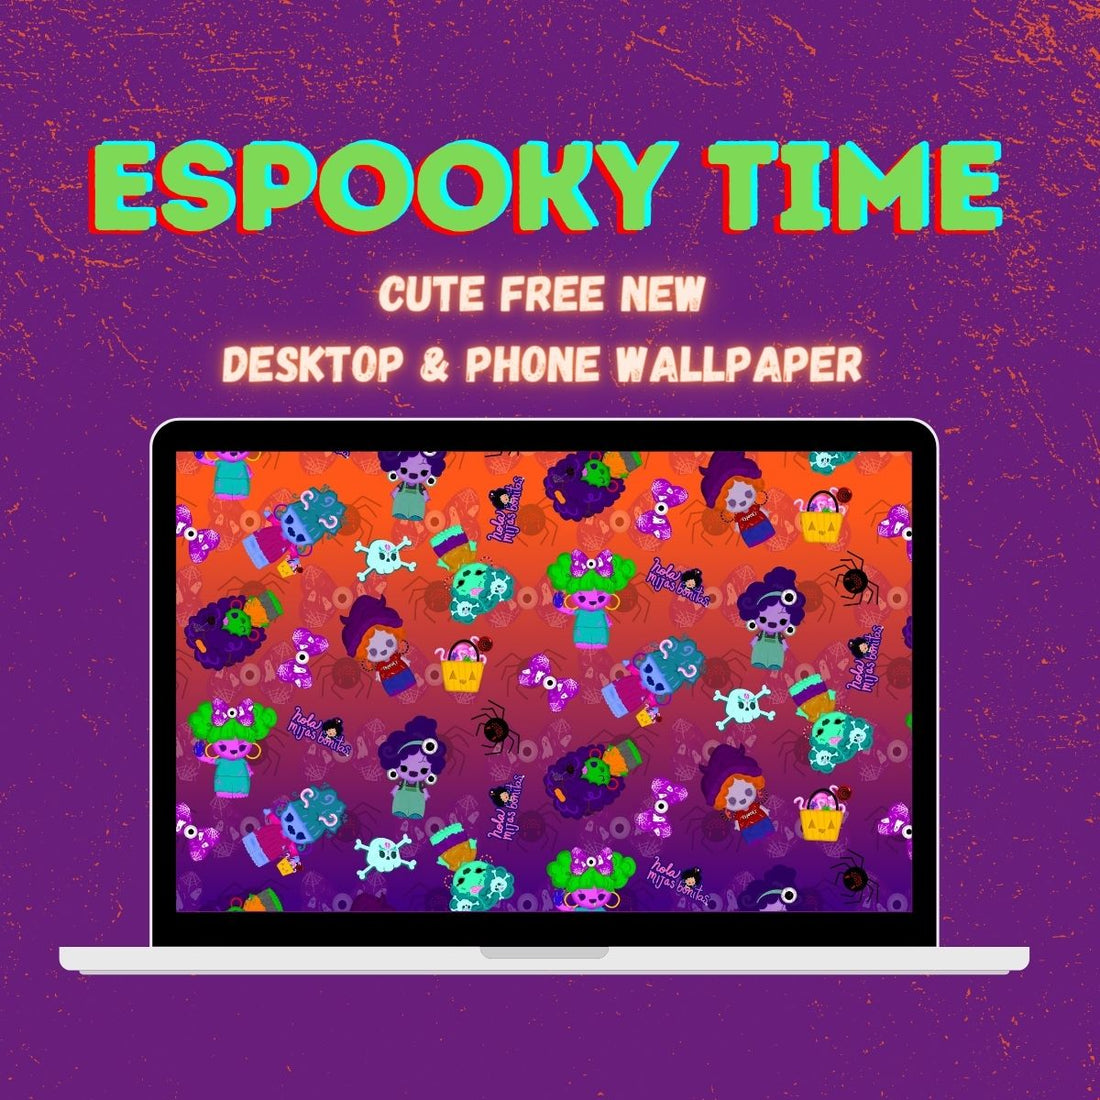 ESPOOKY FREE WALLPAPER FOR YOUR COMPUTER AND PHONE!